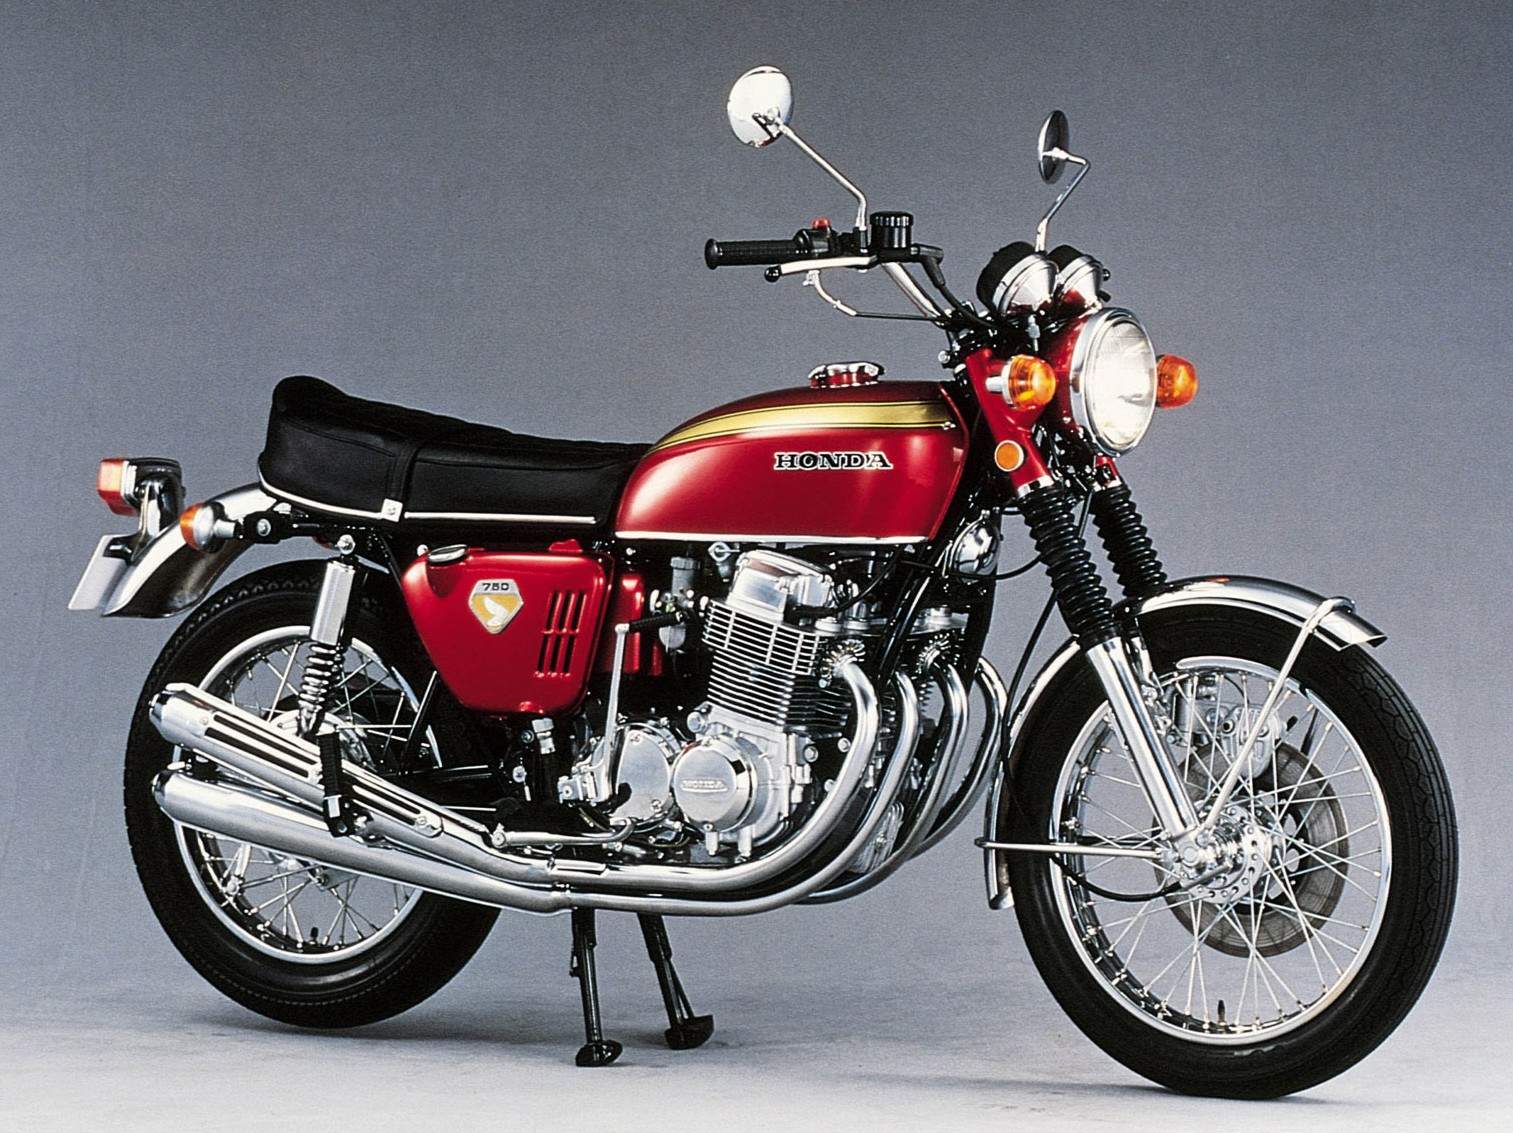 11The Honda CB 750: An Ideal Classic Bike for Collecting